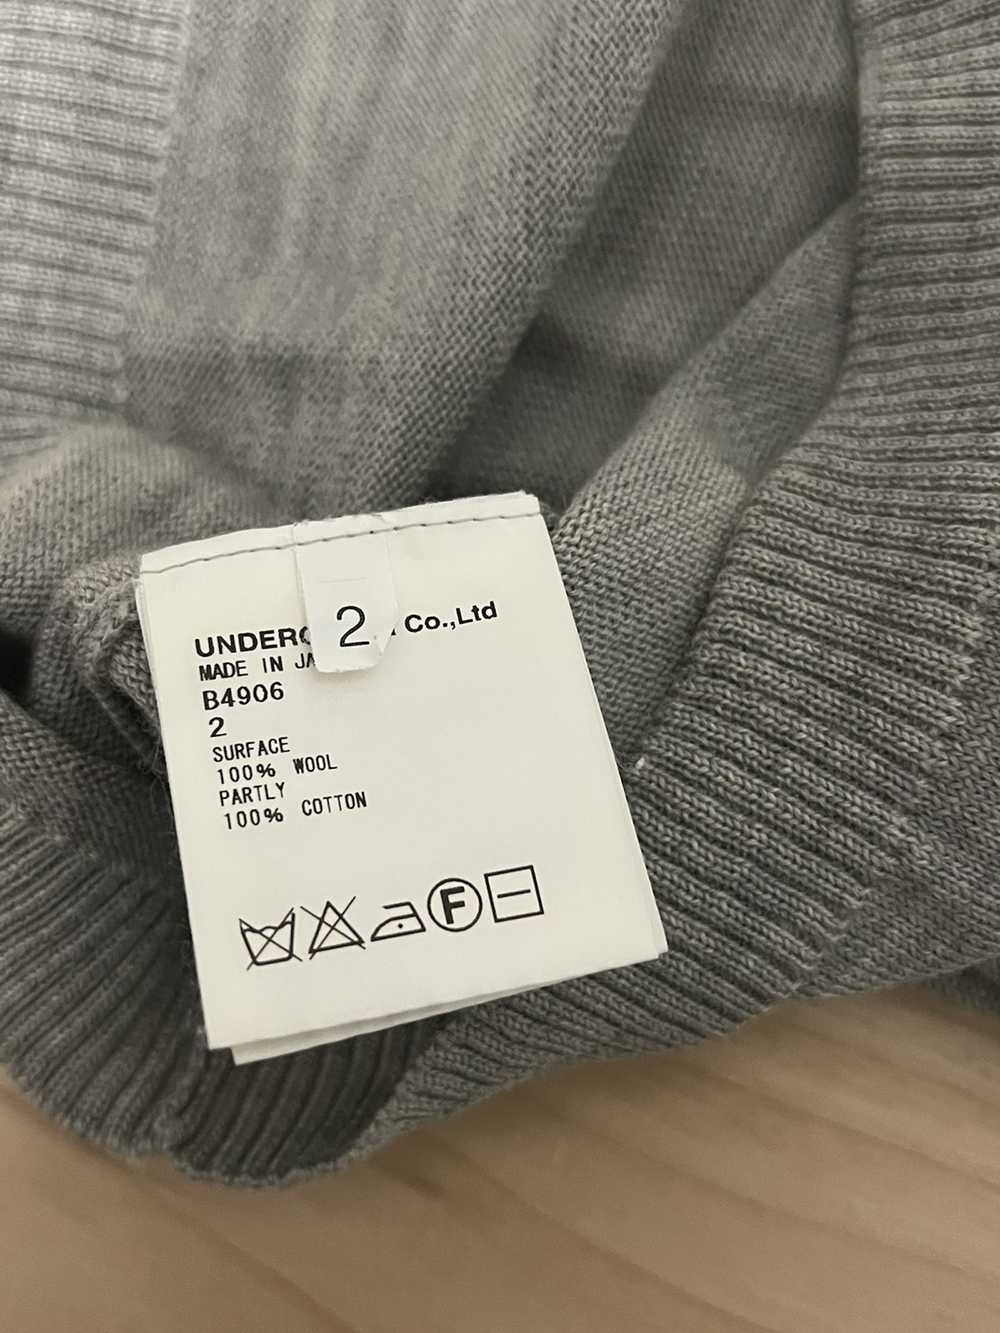 Undercover Undercover AW 08 One Pocket Sweater - image 5